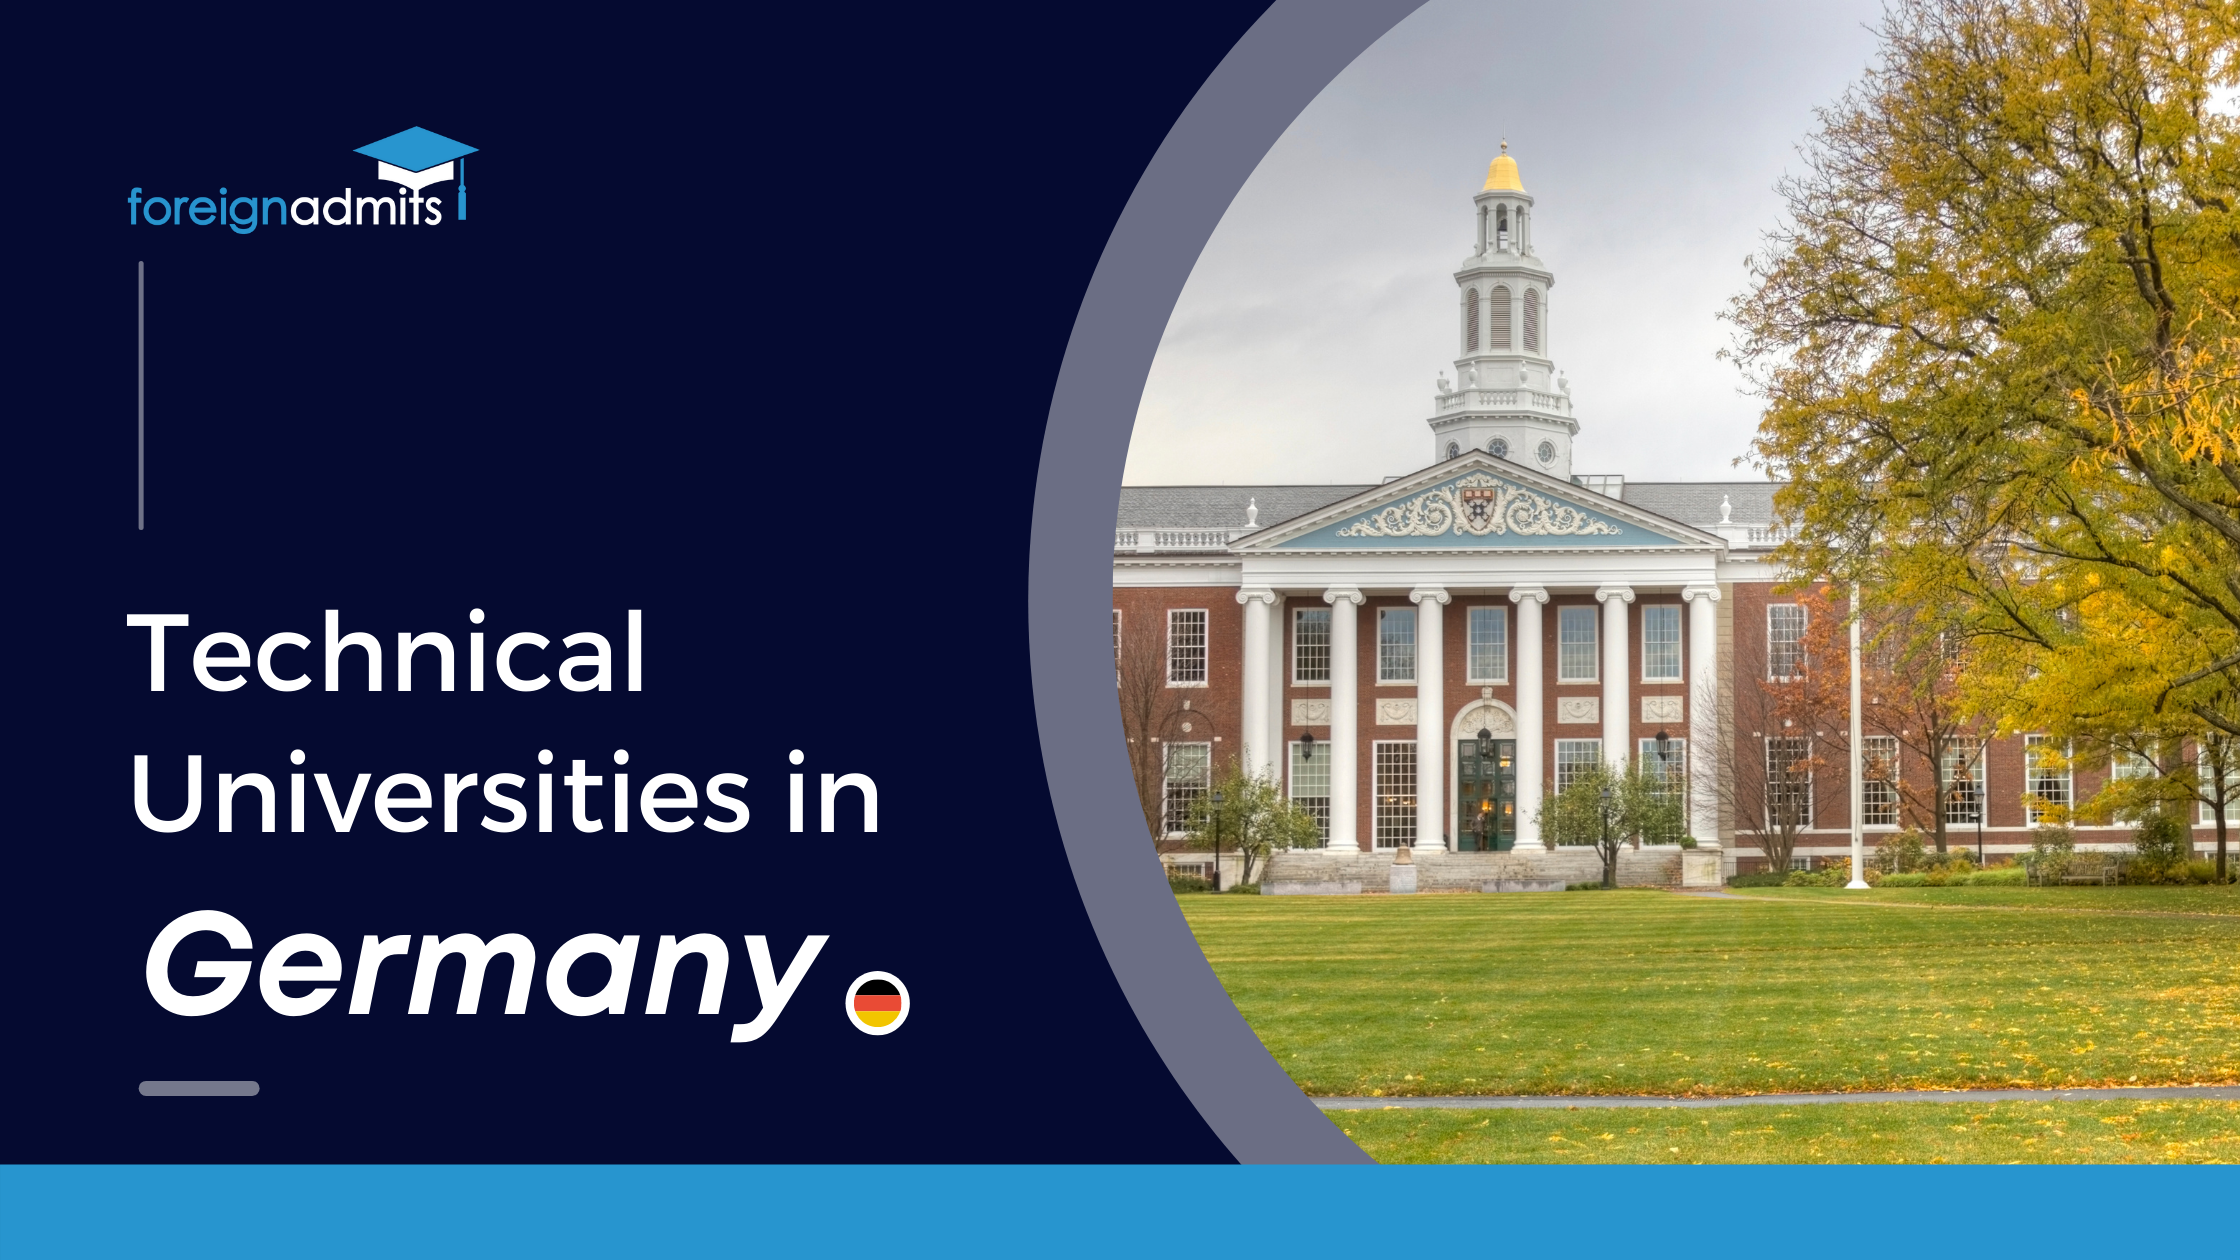 Technical Universities in Germany